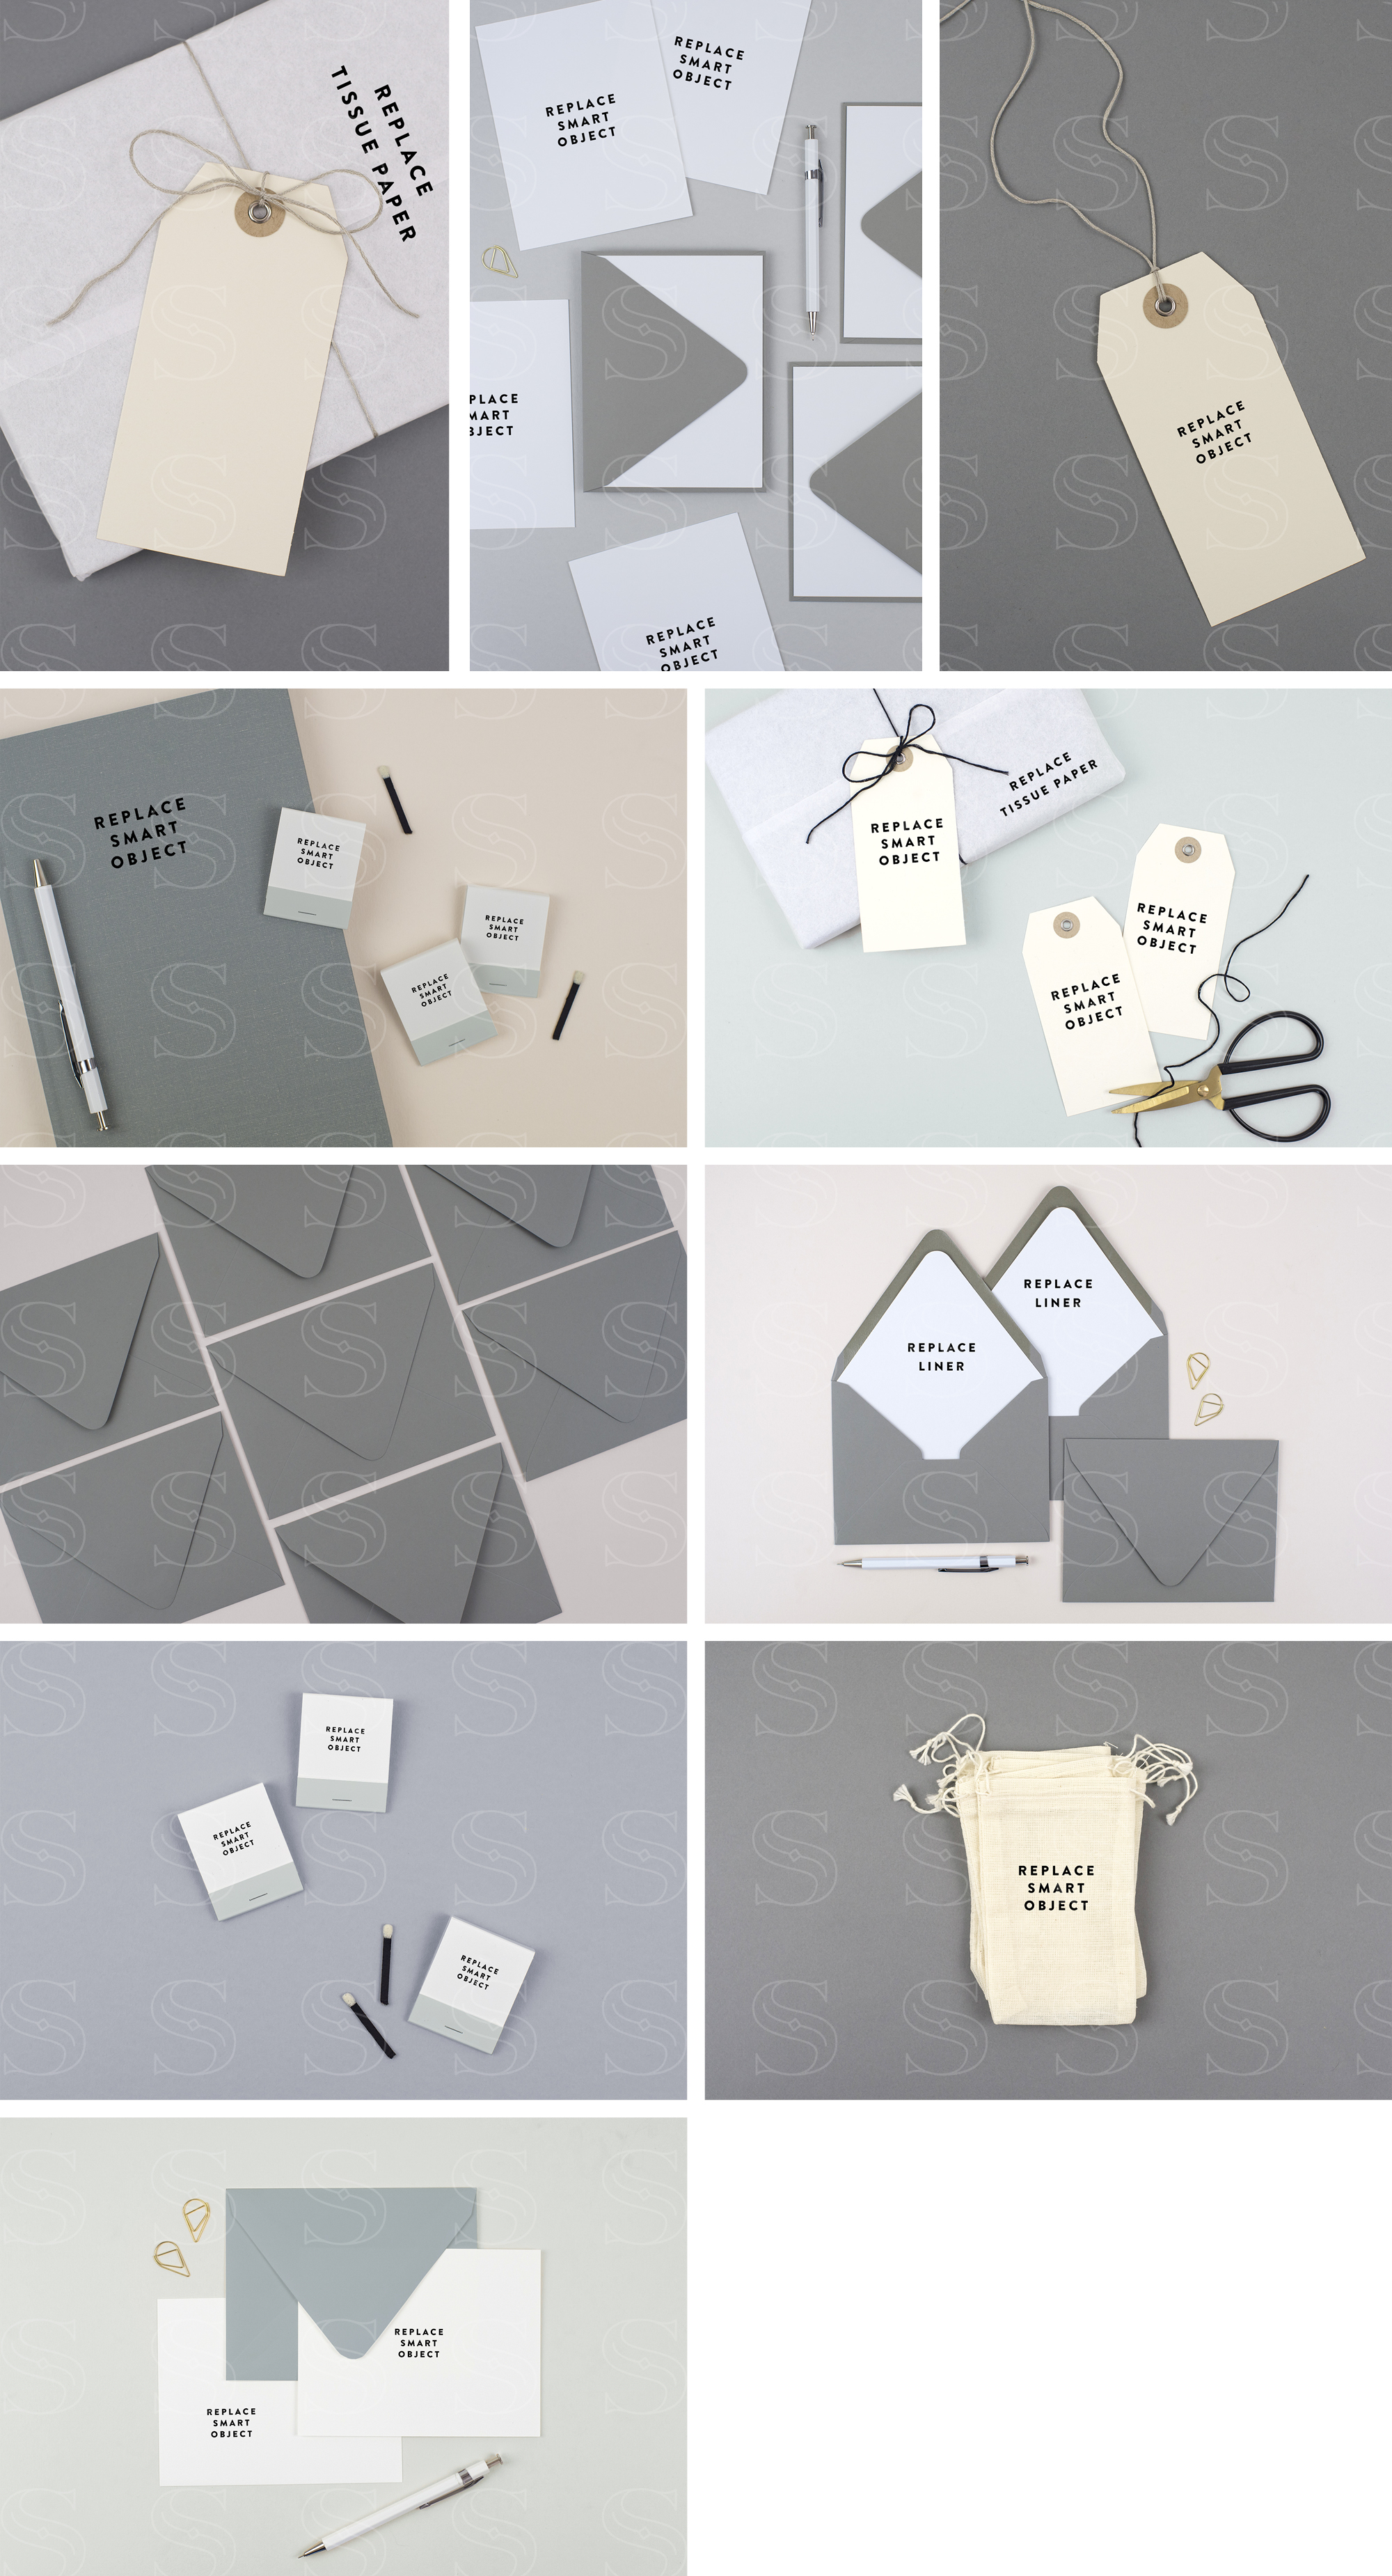 Download Brand Mockups Print Collection Spruce Rd PSD Mockup Templates